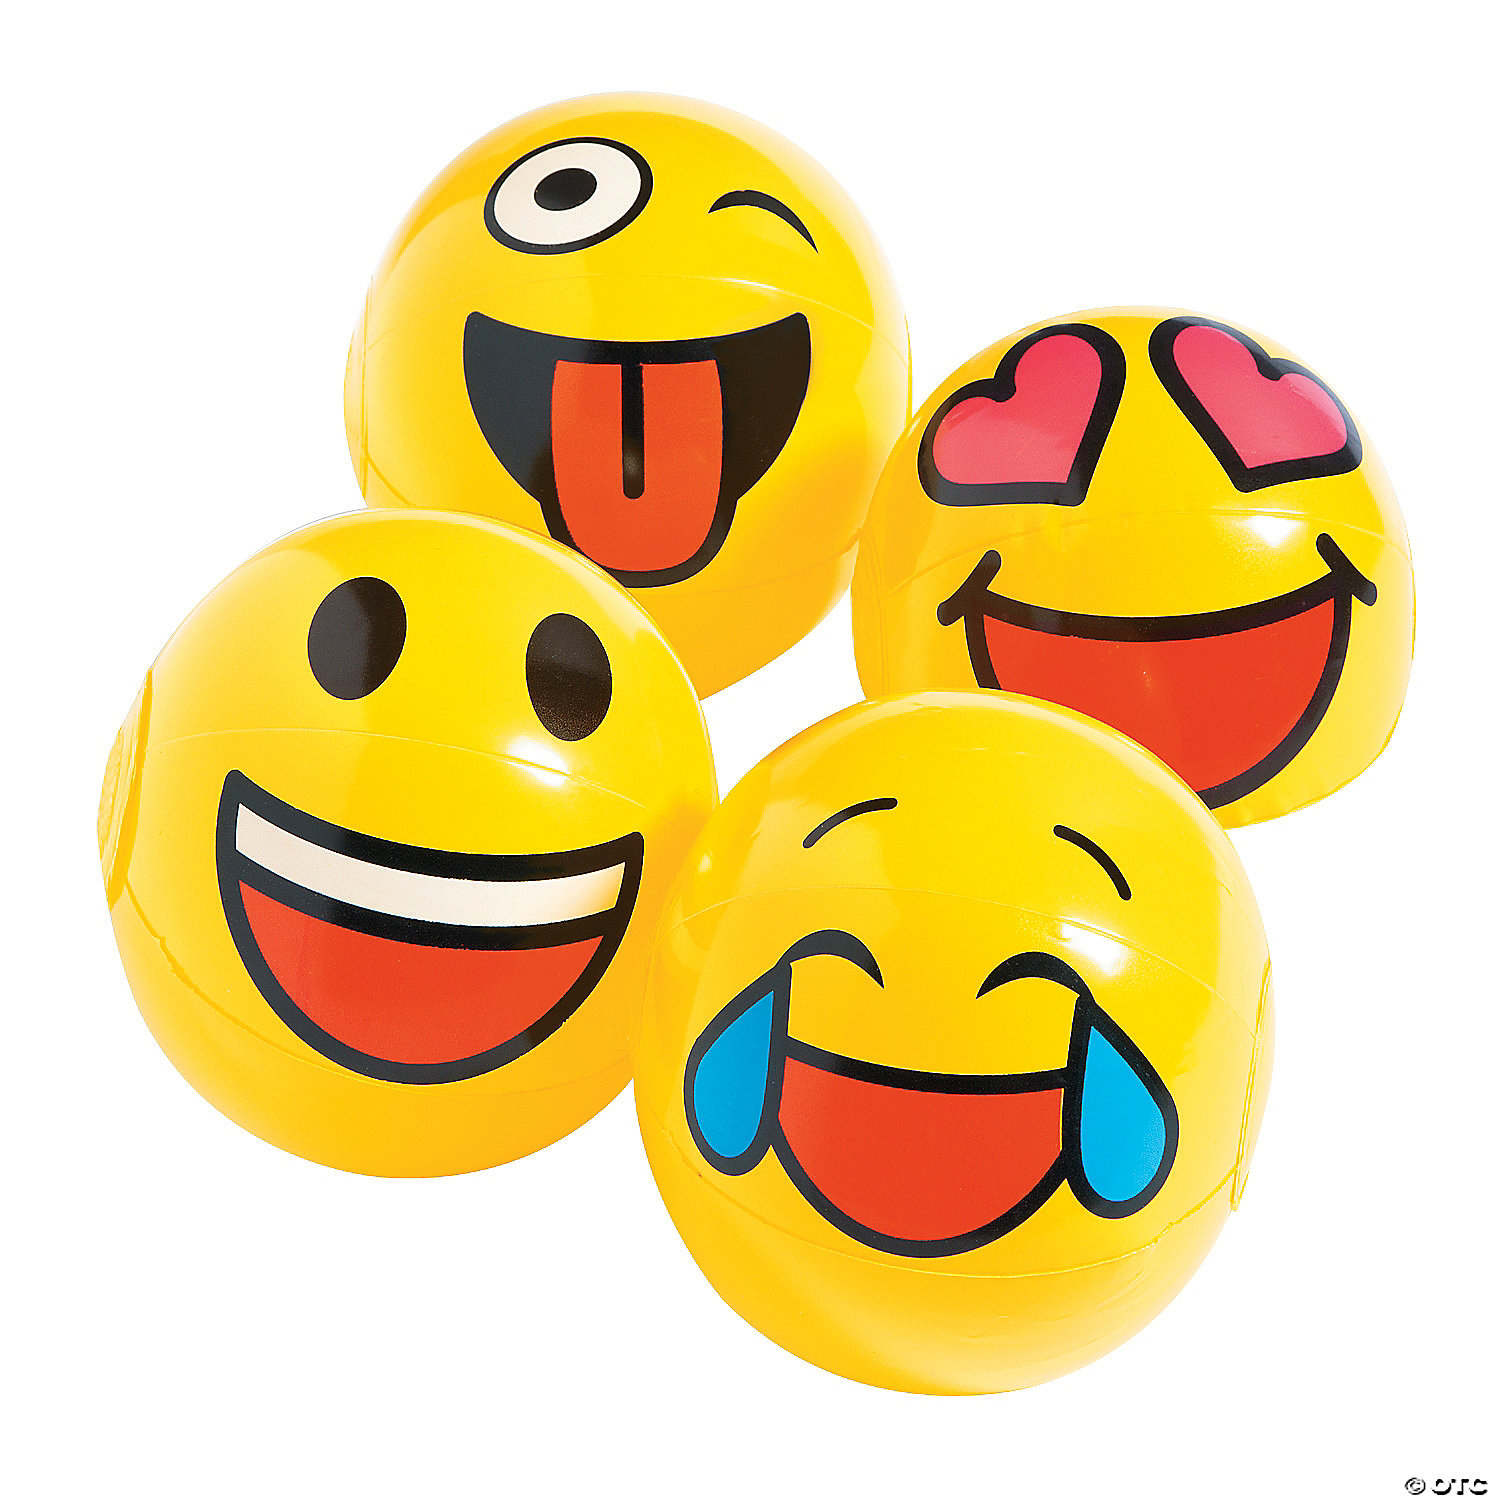 12 NEW MINI SMILE FACE BEACH BALLS 7" INFLATABLE POOL BEACHBALL PARTY FAVORS 